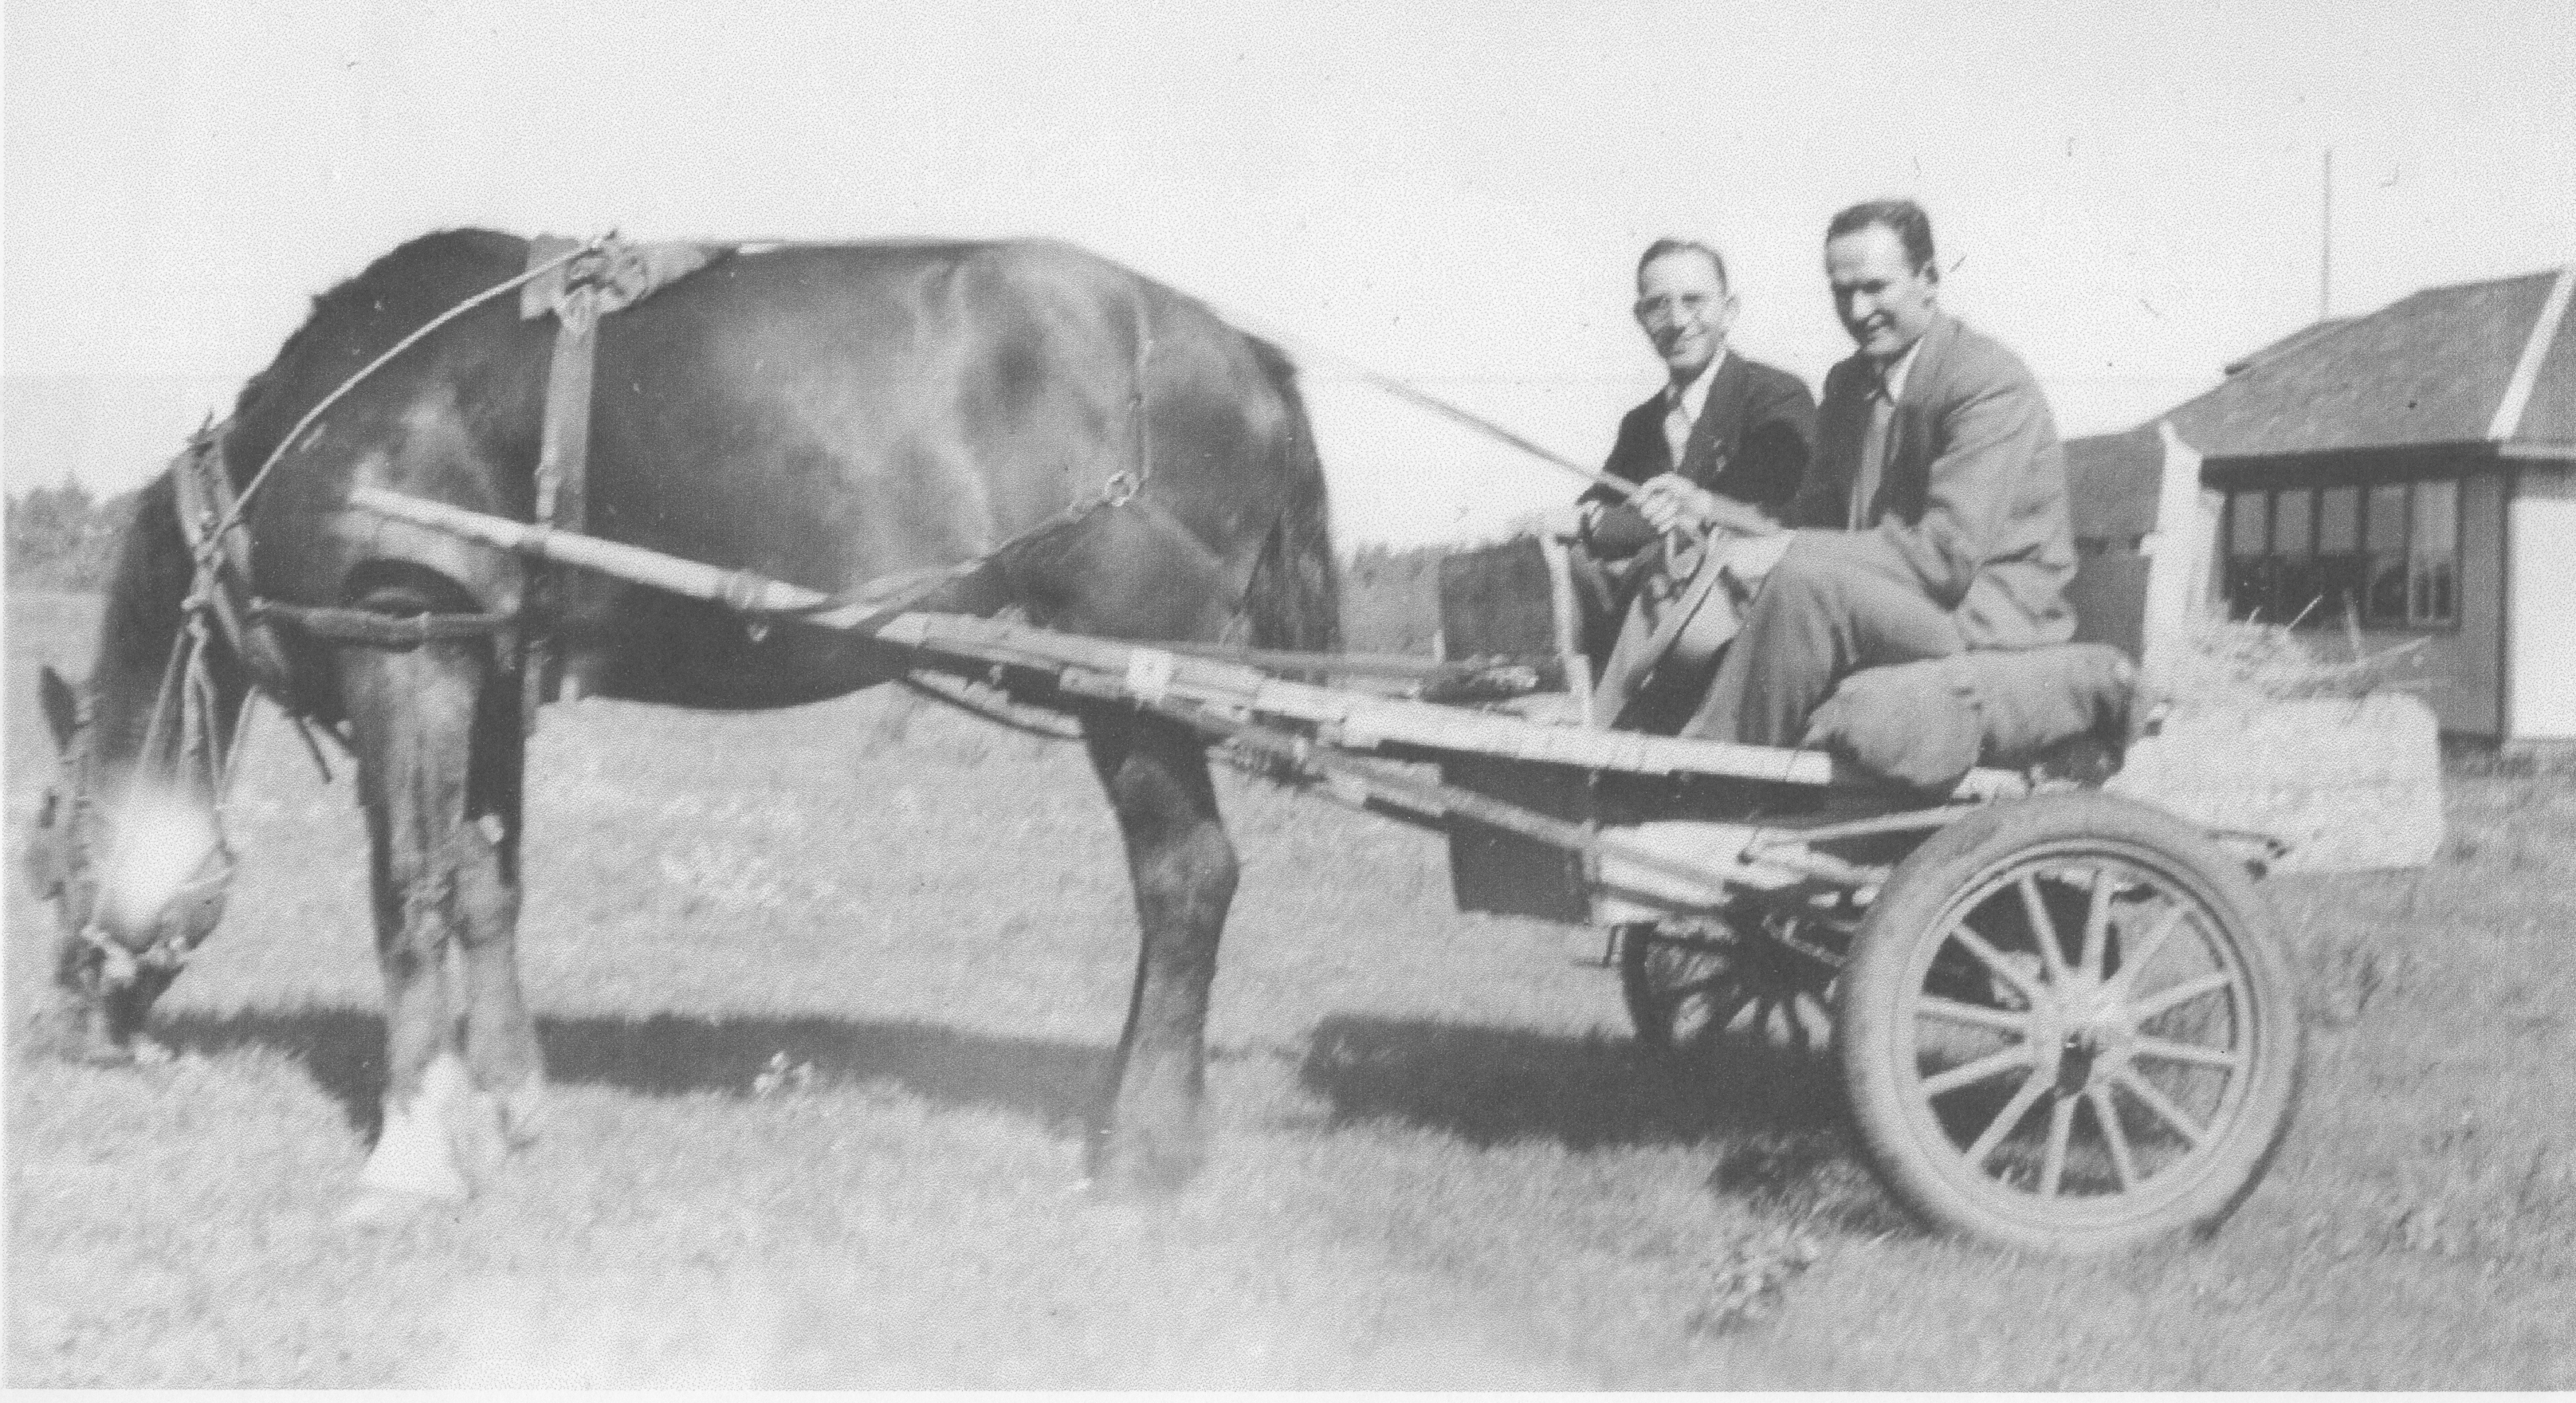 missionaries in a horse drawn carriage